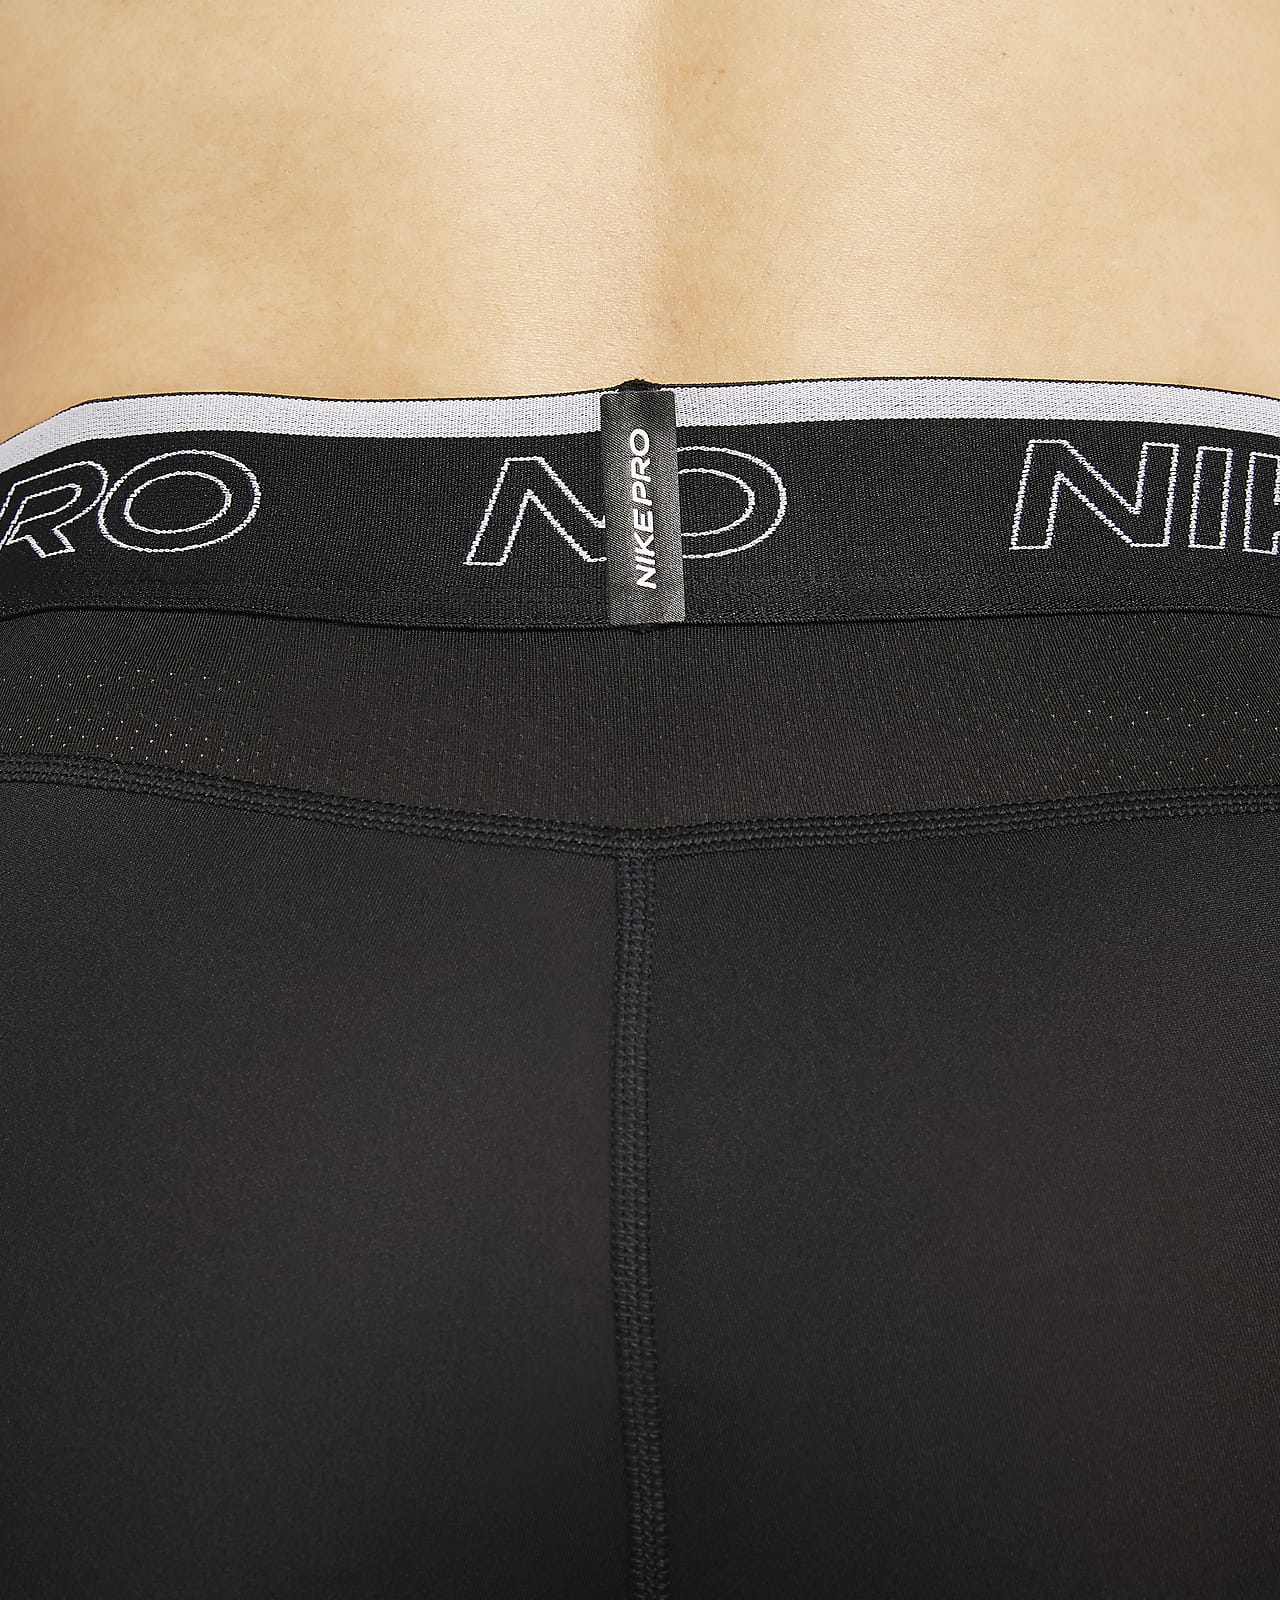 Nike pro dri fit tights • Compare & see prices now »